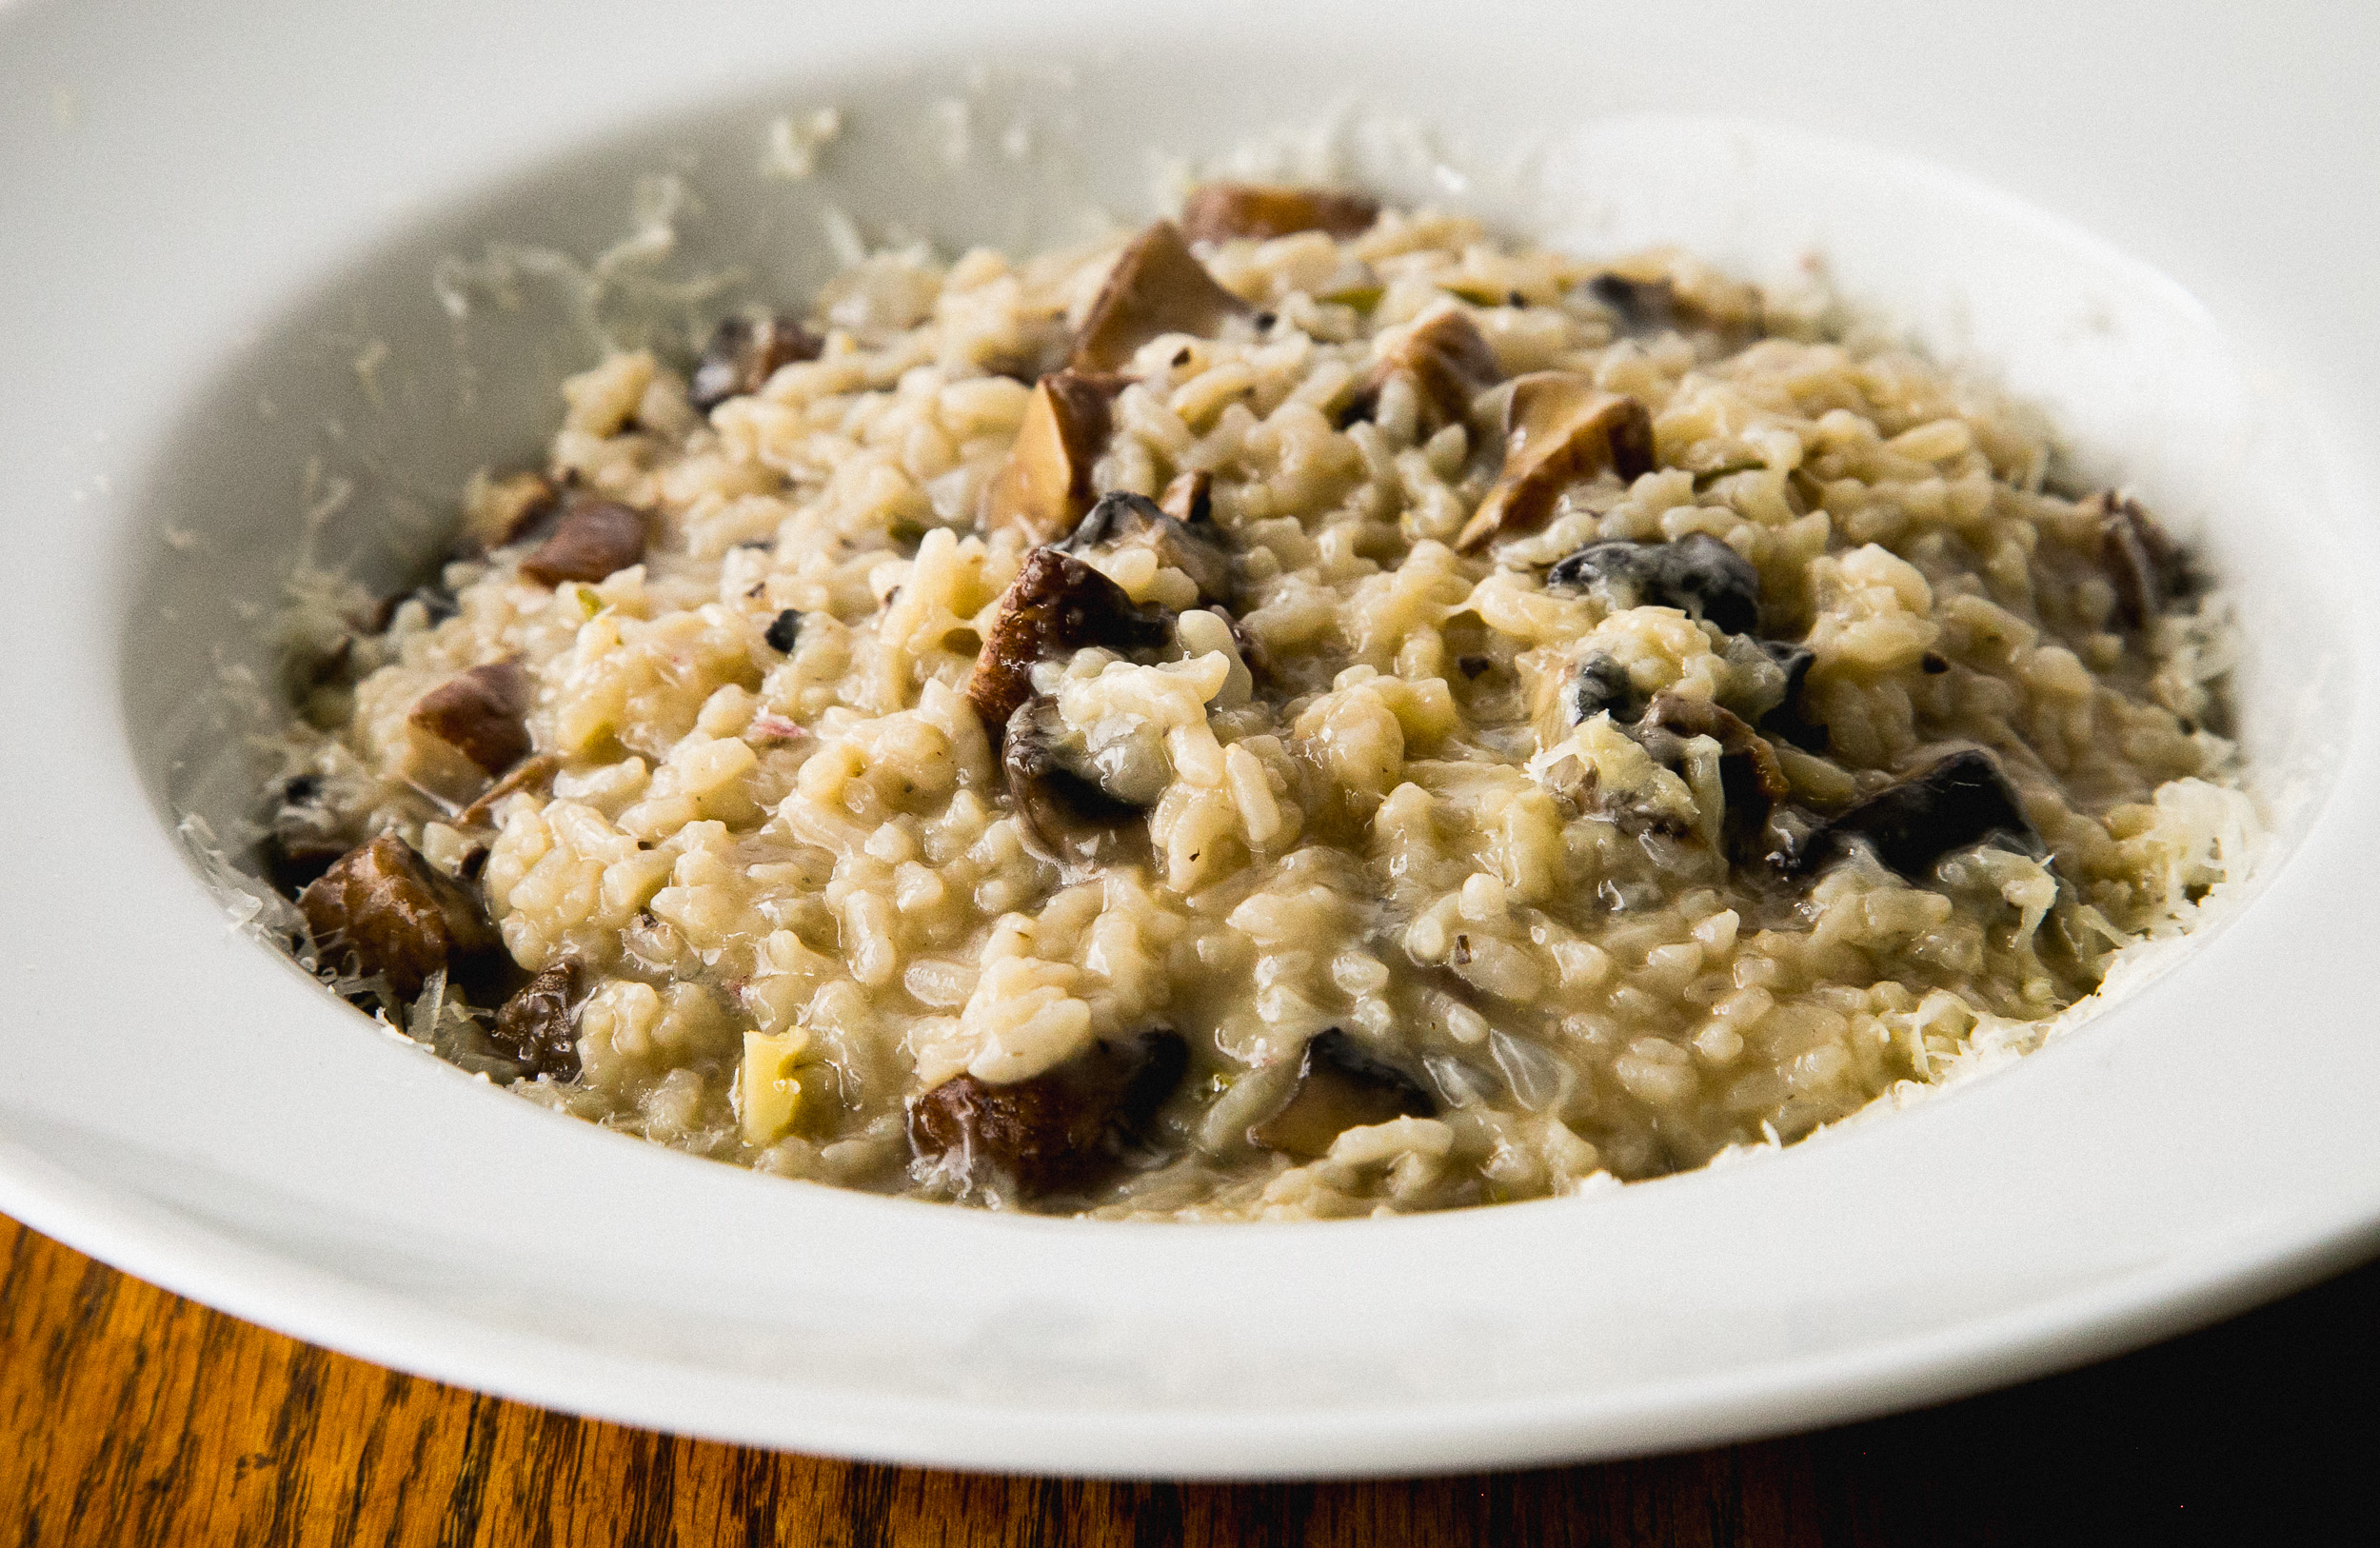 A Unique Instant Pot Mushroom Risotto to Try This Weekend